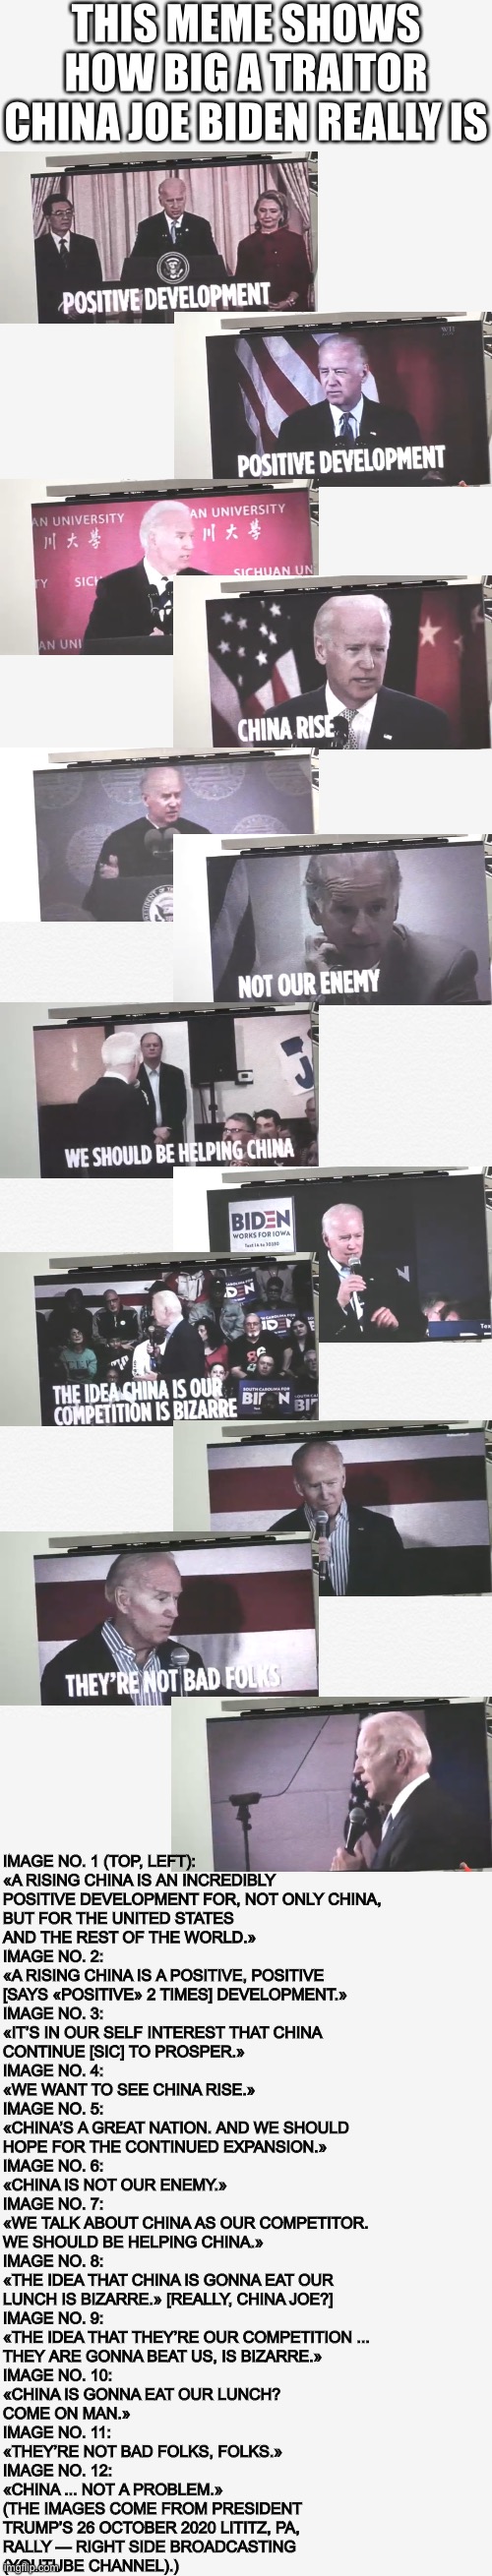 China Joe Biden, America’s worst traitor ever! | THIS MEME SHOWS HOW BIG A TRAITOR CHINA JOE BIDEN REALLY IS; IMAGE NO. 1 (TOP, LEFT):
«A RISING CHINA IS AN INCREDIBLY 
POSITIVE DEVELOPMENT FOR, NOT ONLY CHINA, 
BUT FOR THE UNITED STATES 
AND THE REST OF THE WORLD.»
IMAGE NO. 2:
«A RISING CHINA IS A POSITIVE, POSITIVE 
[SAYS «POSITIVE» 2 TIMES] DEVELOPMENT.»
IMAGE NO. 3: 
«IT’S IN OUR SELF INTEREST THAT CHINA 
CONTINUE [SIC] TO PROSPER.»
IMAGE NO. 4:
«WE WANT TO SEE CHINA RISE.»
IMAGE NO. 5:
«CHINA’S A GREAT NATION. AND WE SHOULD 
HOPE FOR THE CONTINUED EXPANSION.»
IMAGE NO. 6:
«CHINA IS NOT OUR ENEMY.»
IMAGE NO. 7:
«WE TALK ABOUT CHINA AS OUR COMPETITOR. 
WE SHOULD BE HELPING CHINA.»
IMAGE NO. 8:
«THE IDEA THAT CHINA IS GONNA EAT OUR 
LUNCH IS BIZARRE.» [REALLY, CHINA JOE?]
IMAGE NO. 9:
«THE IDEA THAT THEY’RE OUR COMPETITION ... 
THEY ARE GONNA BEAT US, IS BIZARRE.»
IMAGE NO. 10:
«CHINA IS GONNA EAT OUR LUNCH? 
COME ON MAN.»
IMAGE NO. 11:
«THEY’RE NOT BAD FOLKS, FOLKS.»
IMAGE NO. 12:
«CHINA ... NOT A PROBLEM.»
(THE IMAGES COME FROM PRESIDENT
TRUMP’S 26 OCTOBER 2020 LITITZ, PA,
RALLY — RIGHT SIDE BROADCASTING 
(YOUTUBE CHANNEL).) | image tagged in joe biden,biden,creepy joe biden,democratic party,government corruption,election 2020 | made w/ Imgflip meme maker